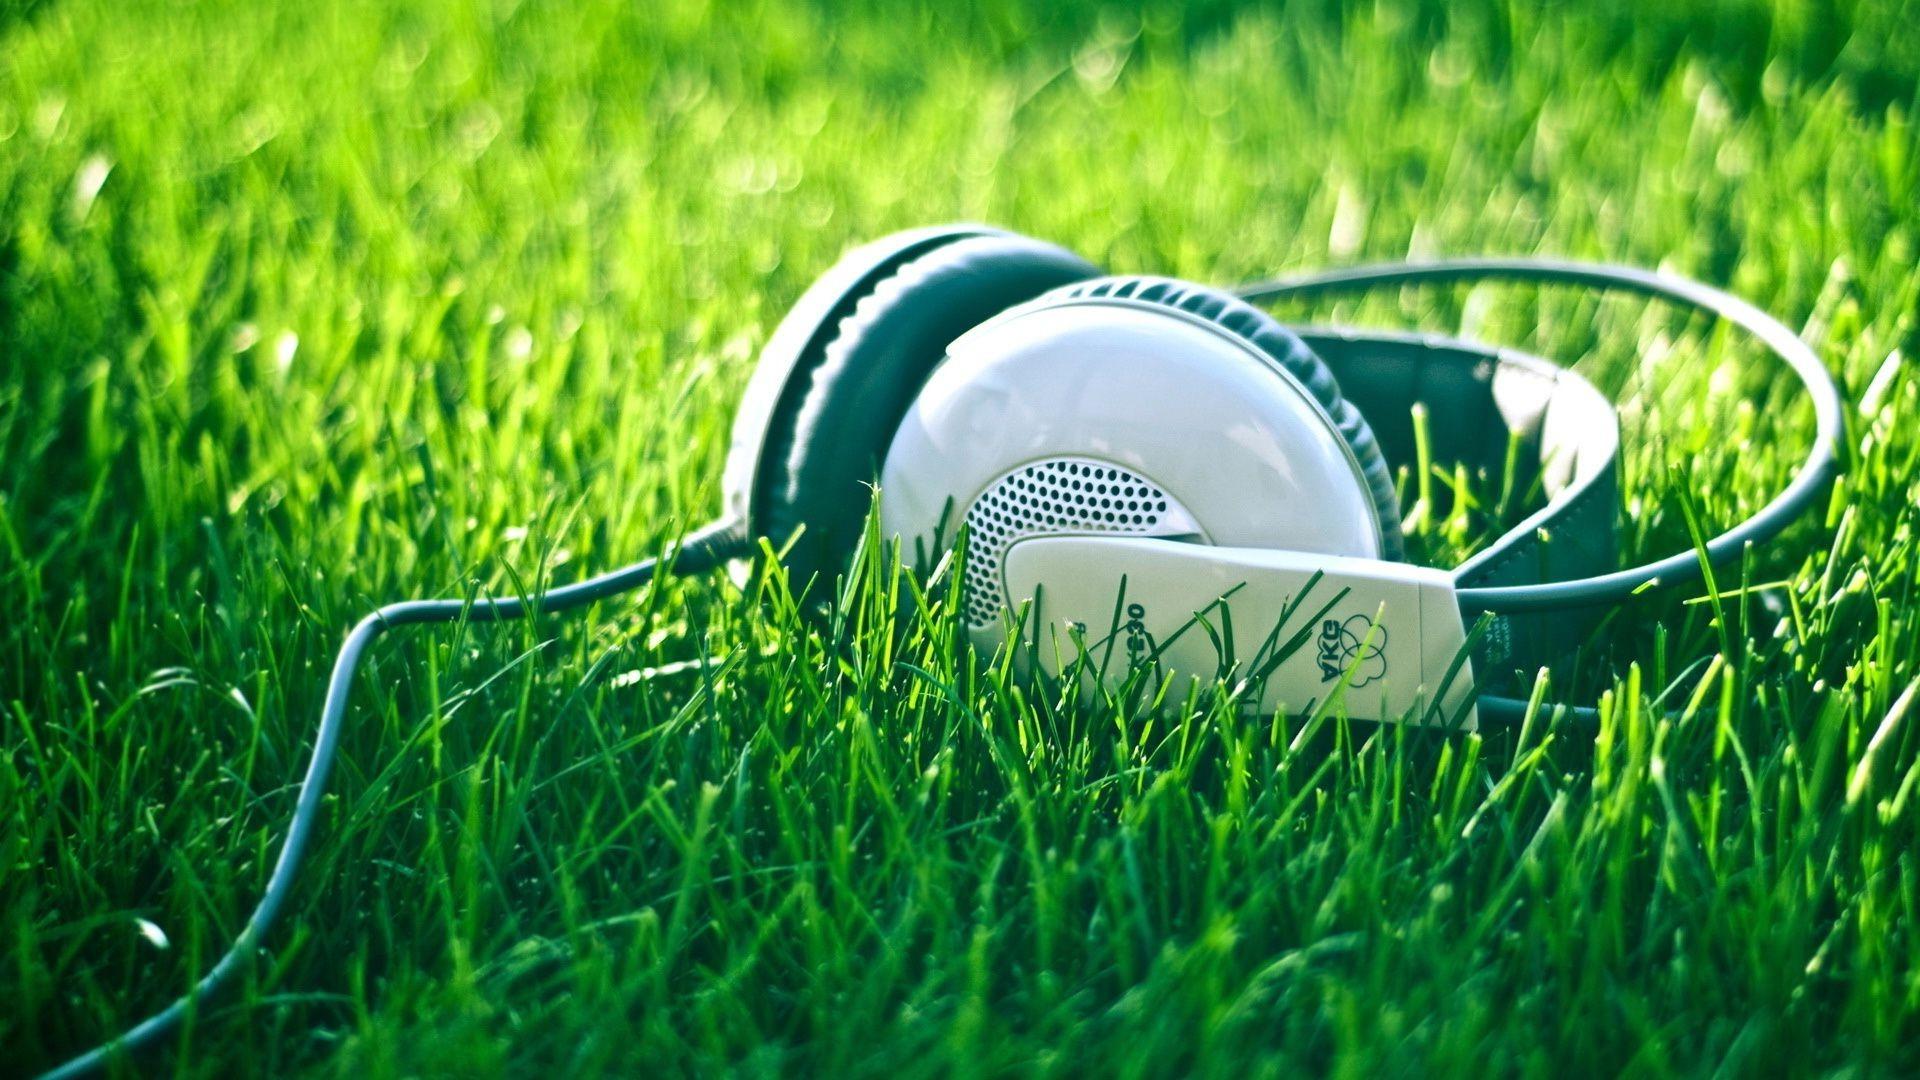 AKG headphones on the lawn. Android wallpaper for free